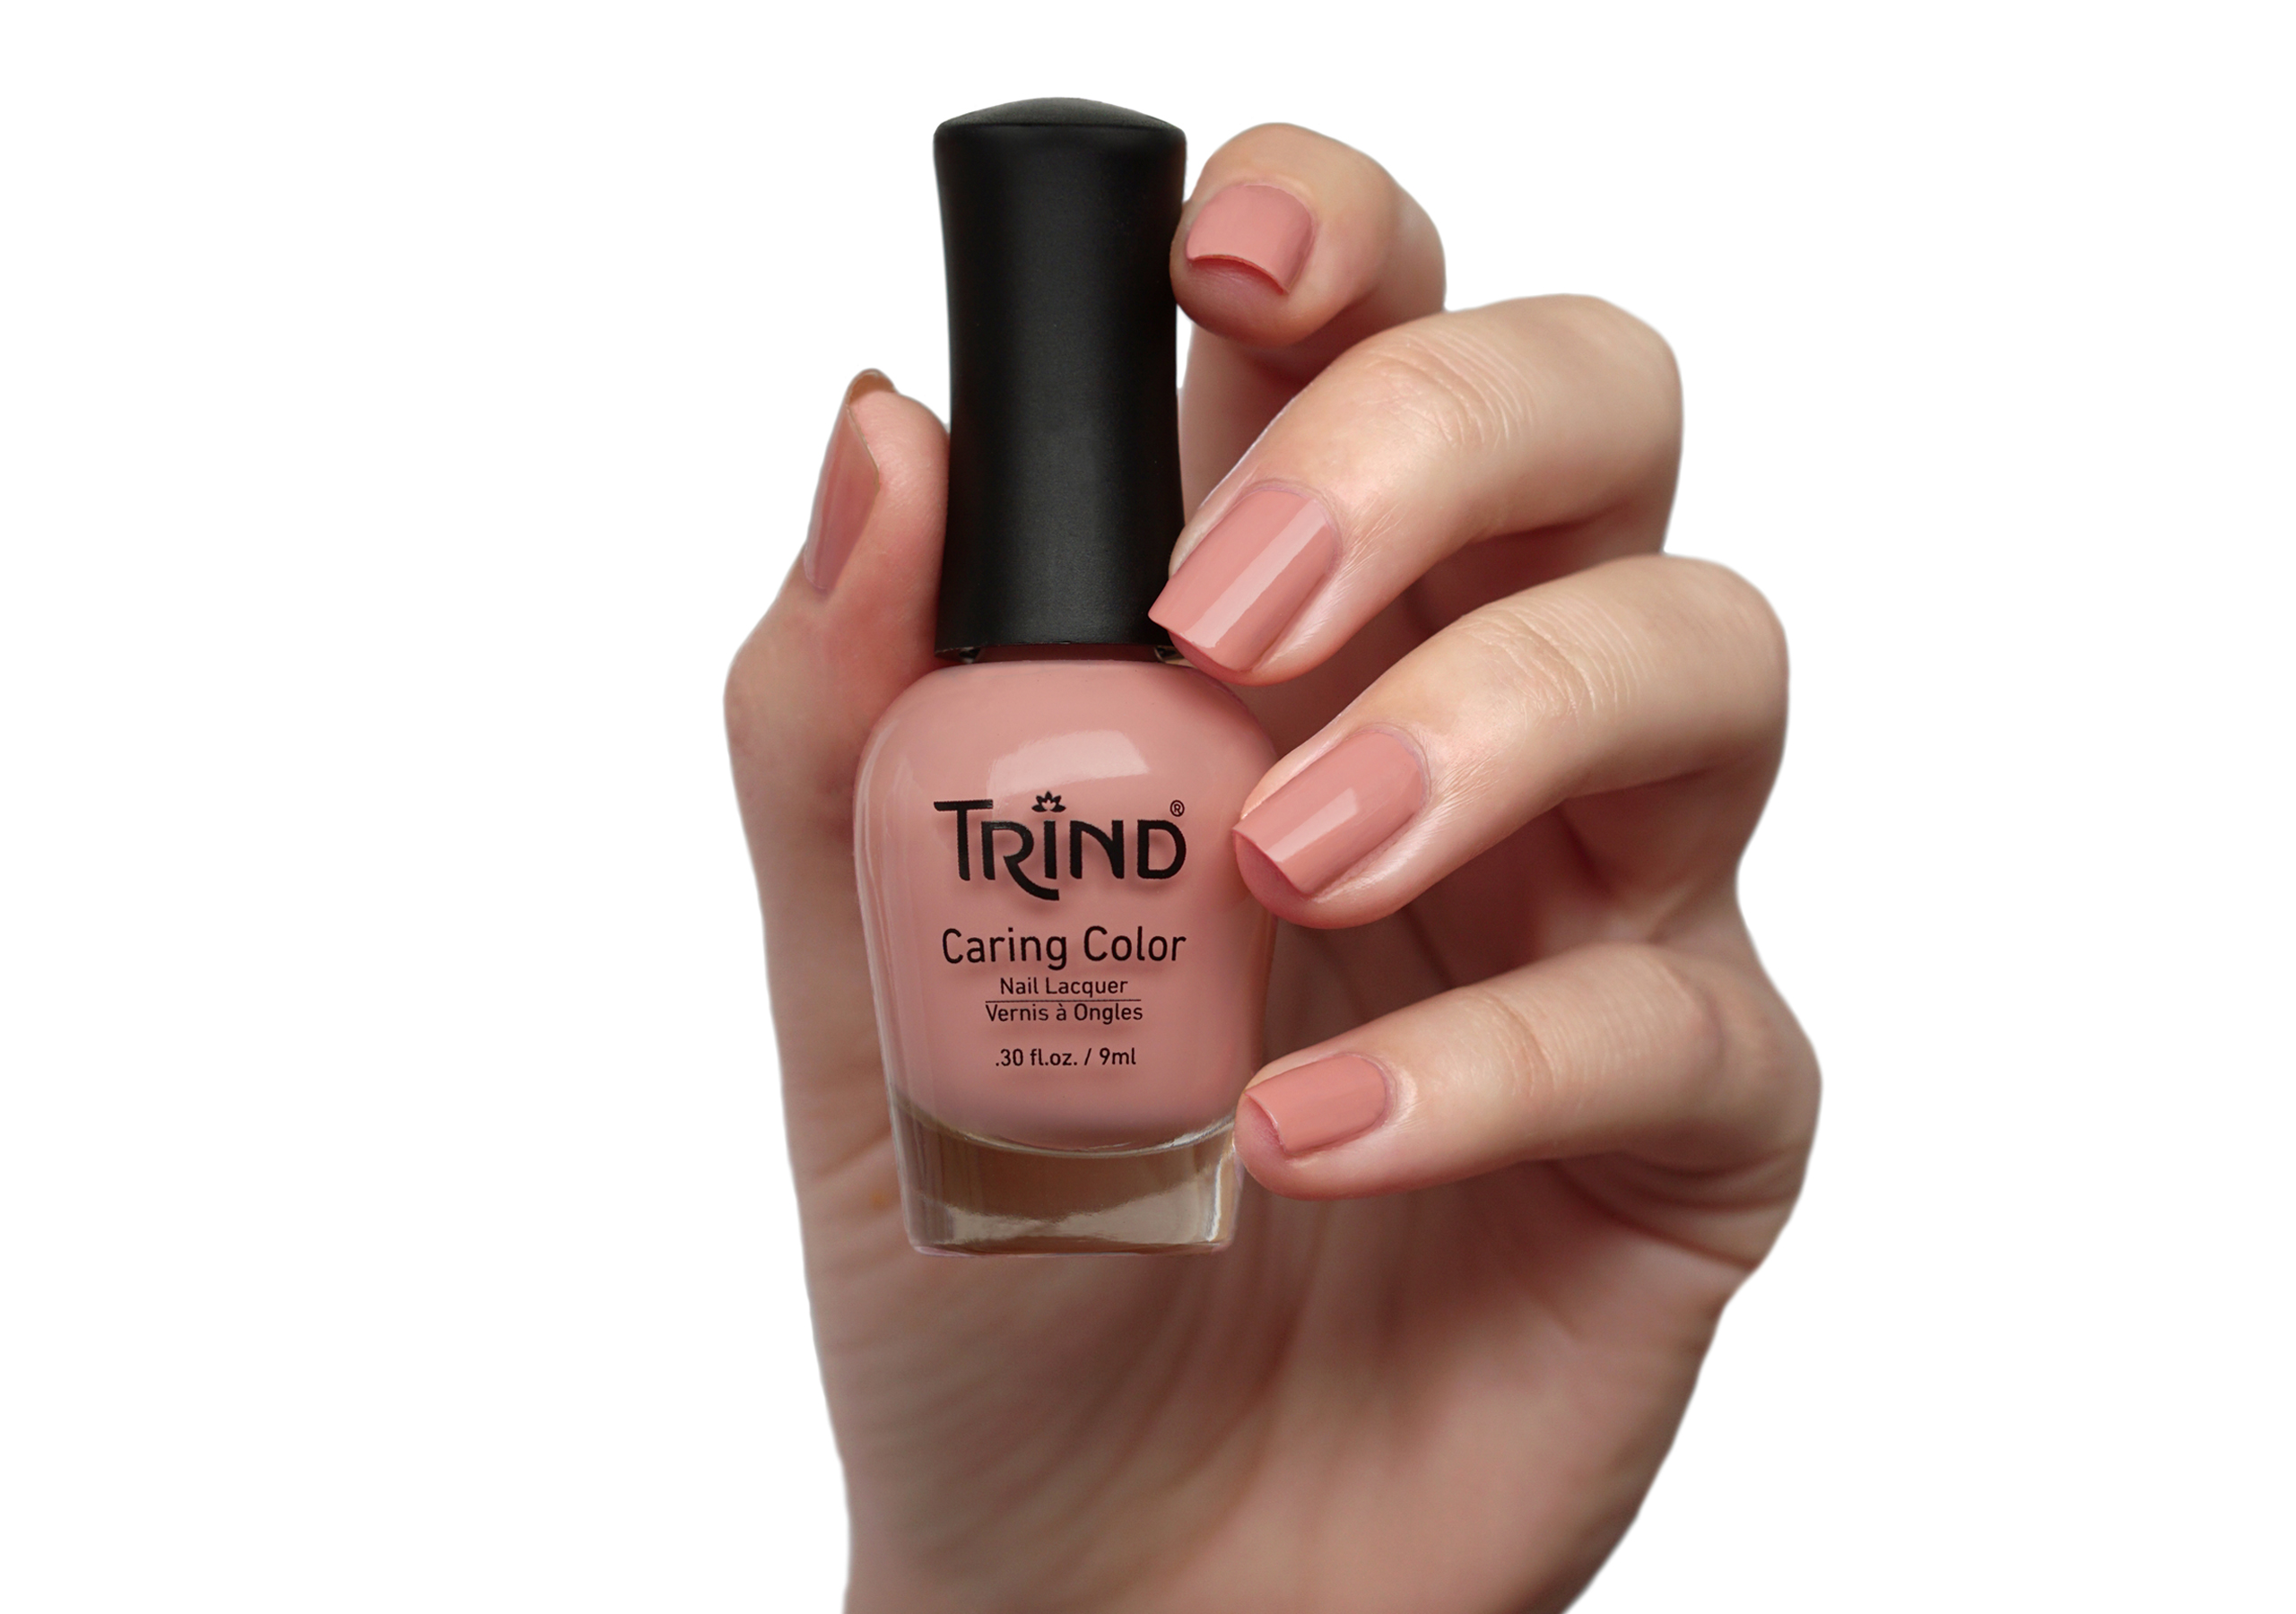 6. DND Nail Polish - Falling for You - wide 8